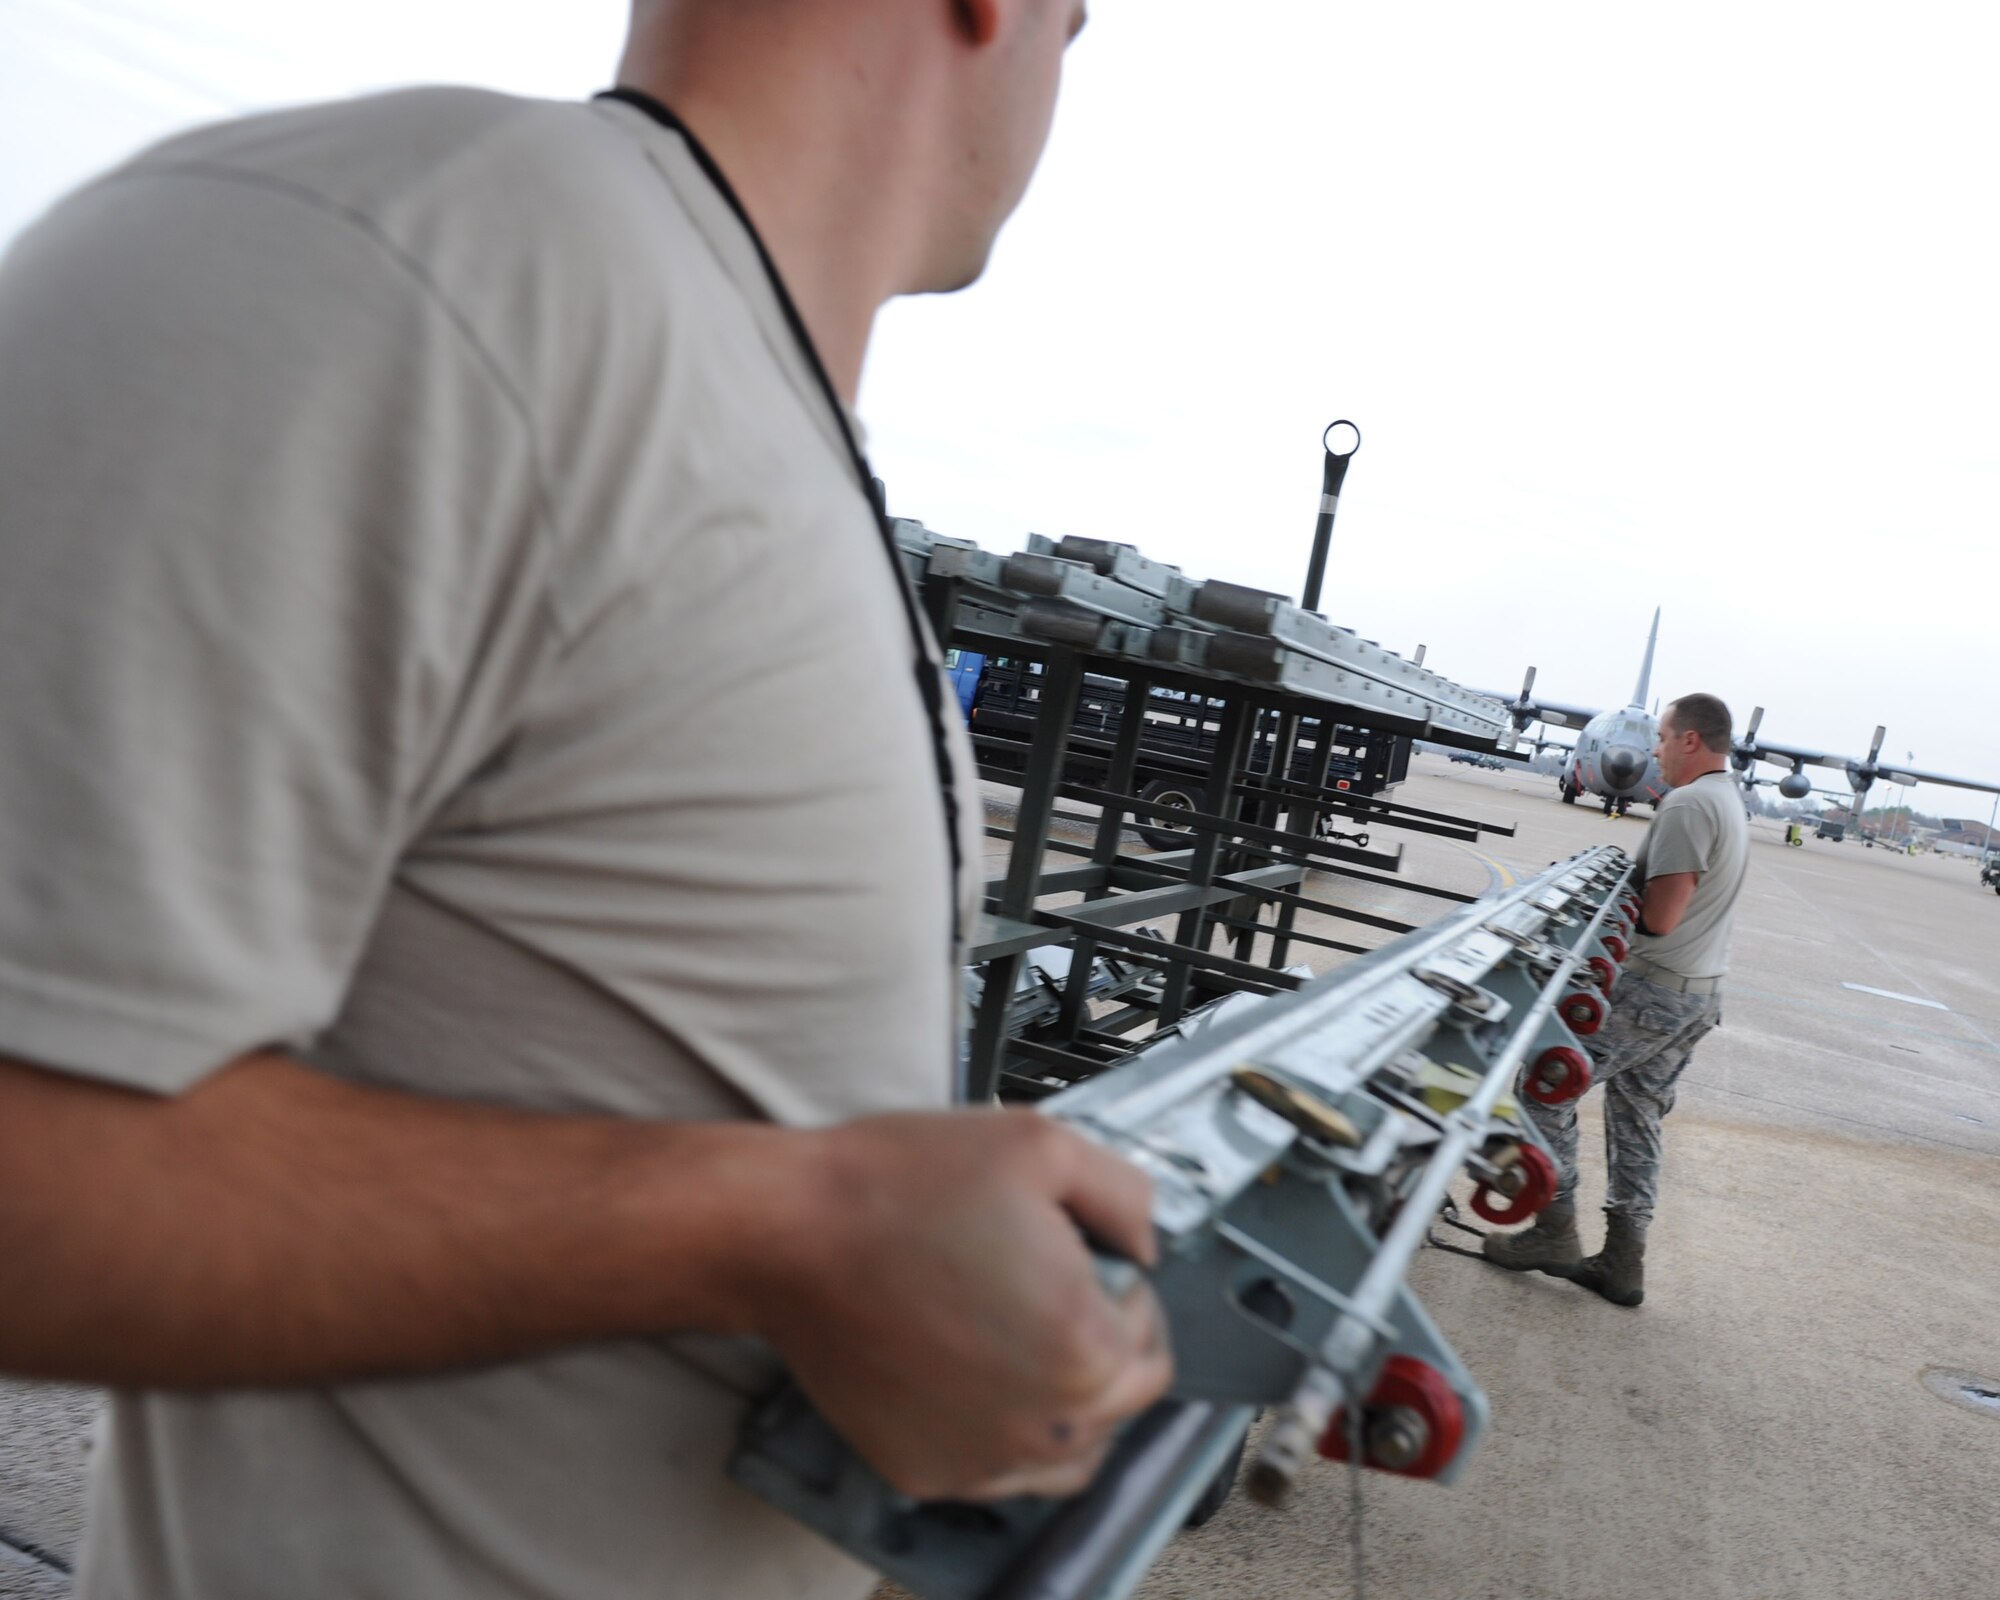 Senior Airman James Szelinski, a 314th Aircraft Maintenance Squadron dual rail specialist, and Tech. Sgt. Scott Wright, 314th Aircraft Maintenance Squadron section chief non commissioned officer in charge, load a section of a rail system onto a transport trailer Dec. 16, 2011, at Little Rock Air Force Base, Ark.  Airmen from the 314th AMXS are performing a routine maintenance inspection on the cargo rail system of the Blue Angels C-130T Hercules nicknamed “Fat Albert” and preparing the aircraft for the upcoming air-show season. The Blue Angels will headline the open house and air show at Little Rock AFB scheduled for Sept.  8 and 9. (U.S. Air Force photo by Tech. Sgt. Chad Chisholm)